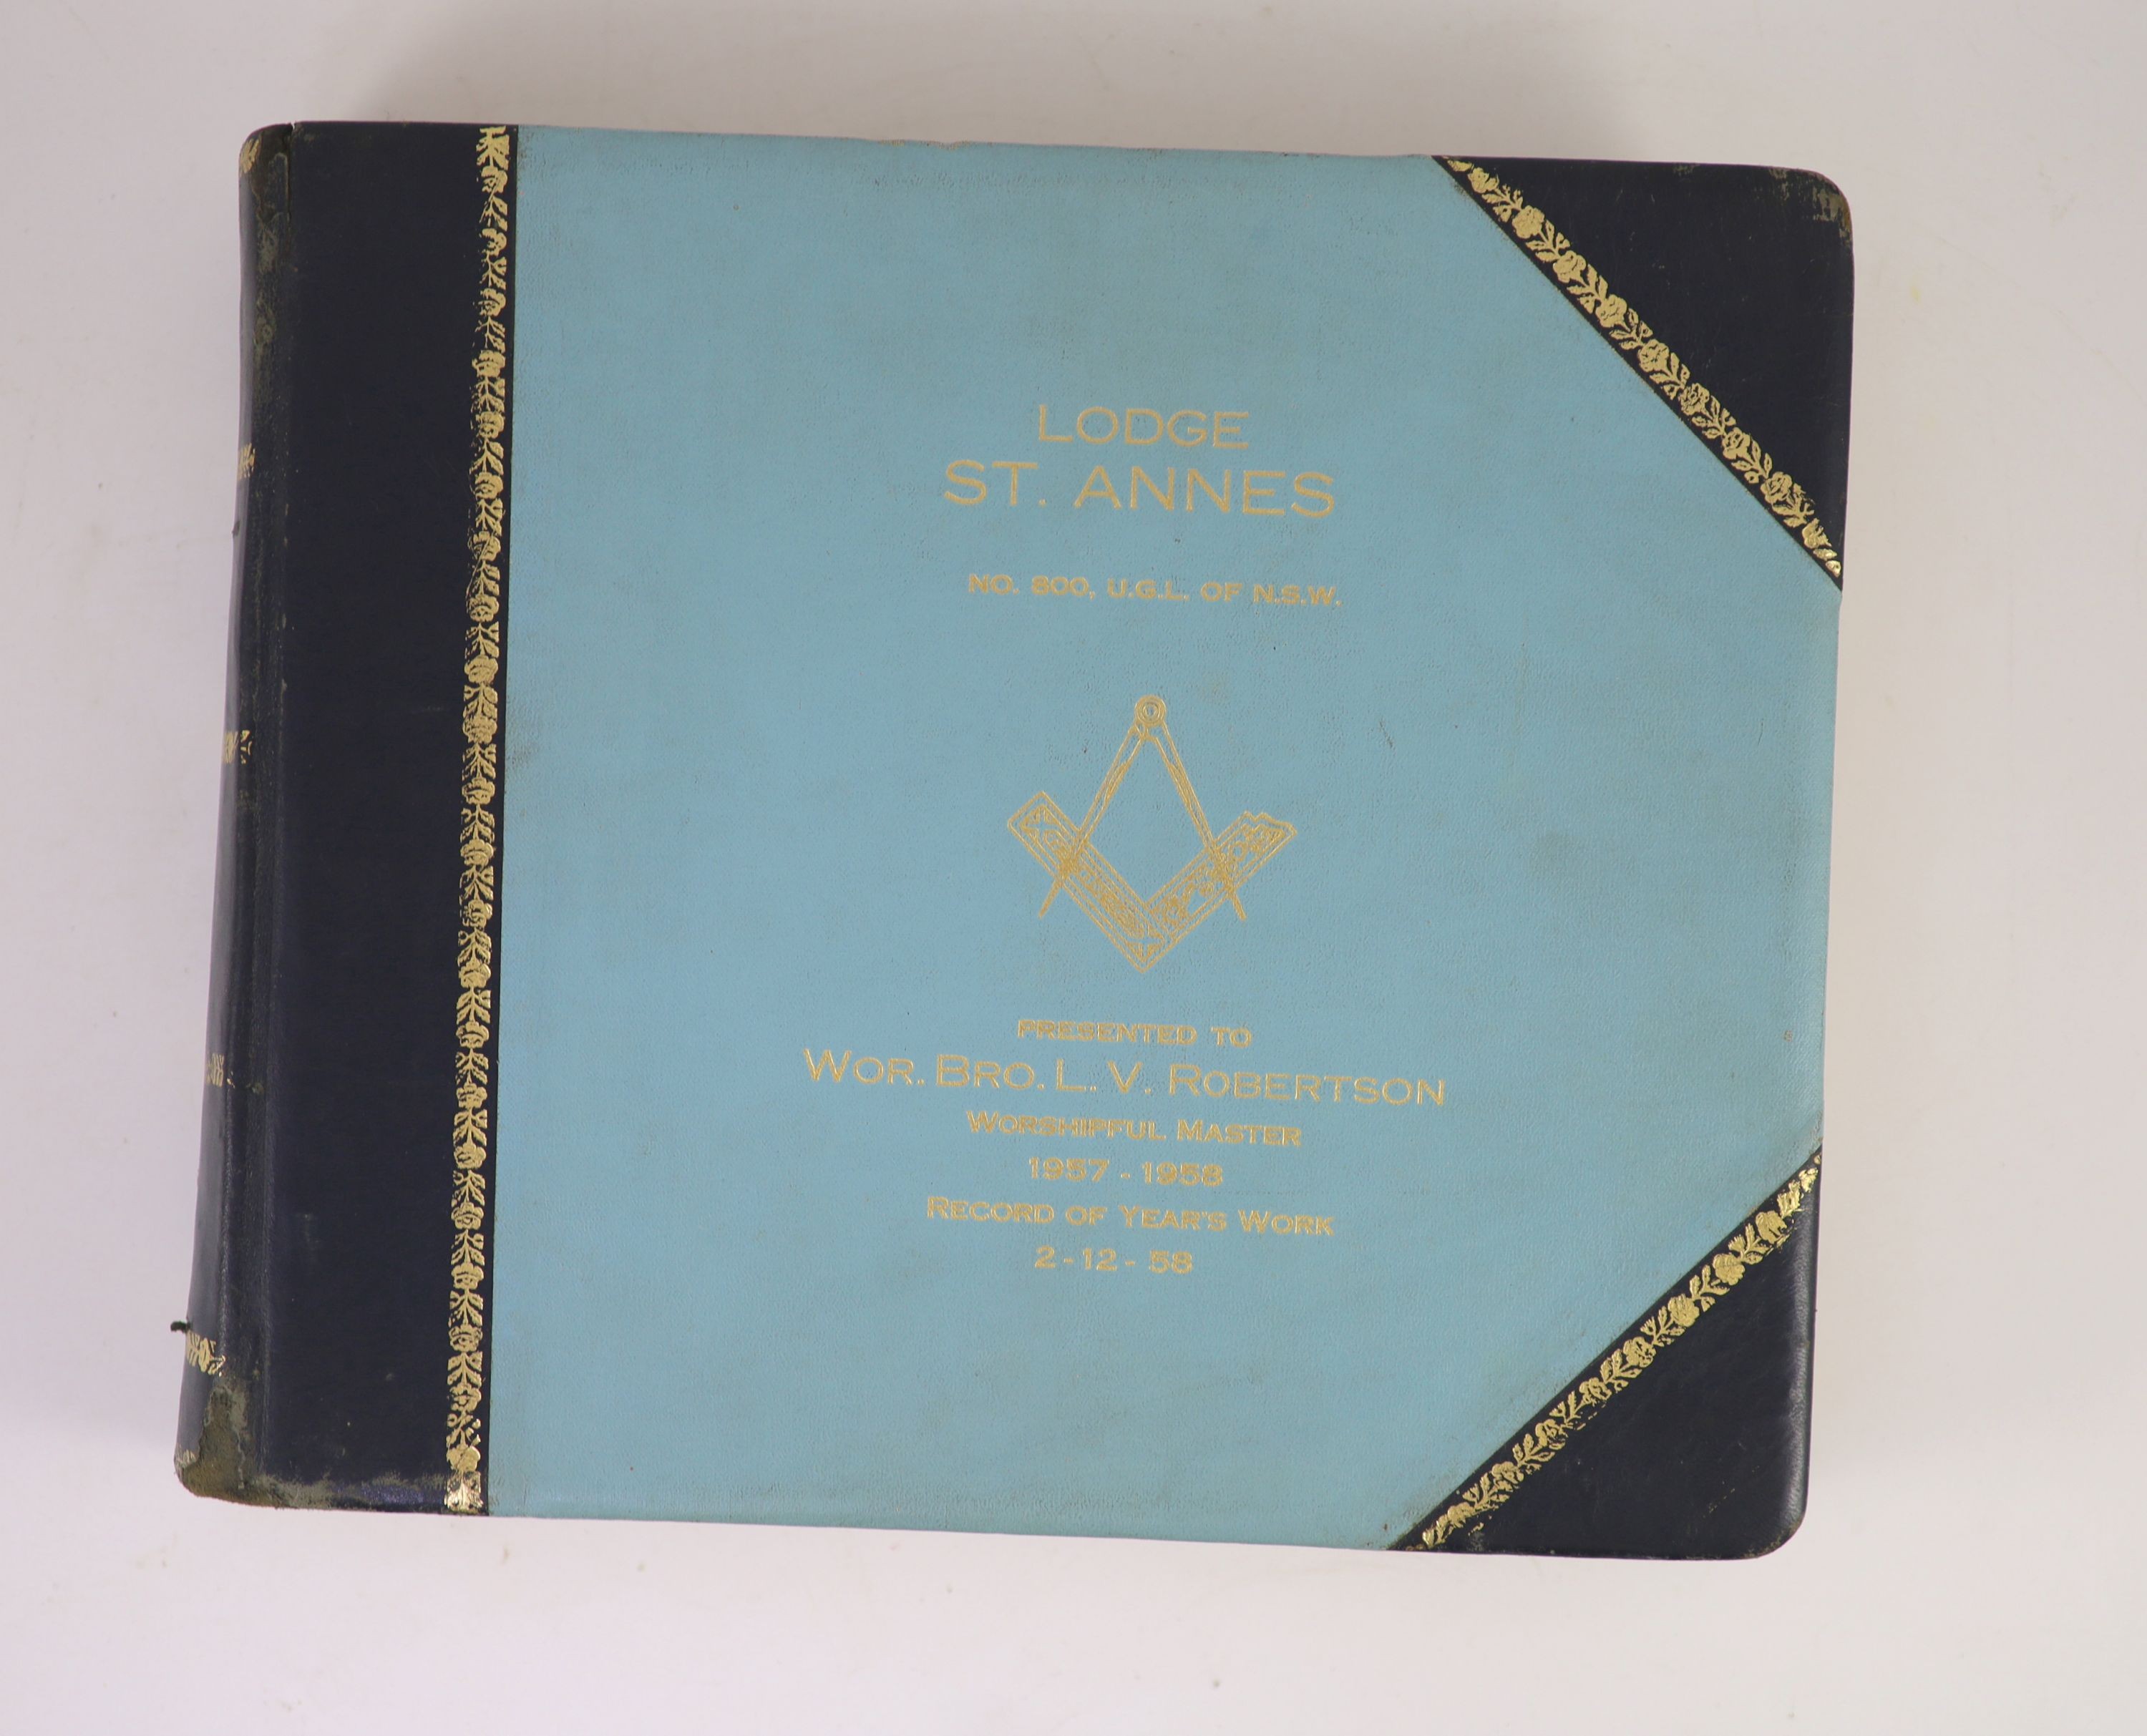 [Freemasonry]. Lodge St. Annes No. 800, U. G. L. of N. S. W.) Presented to Wor. Bro. L. V. Robertson Worshipful Master 1957 – 1958 (A) Record of Year’s Work 2 – 12 – 58., Oblong quarto, titled in gilt (as above) in a wor